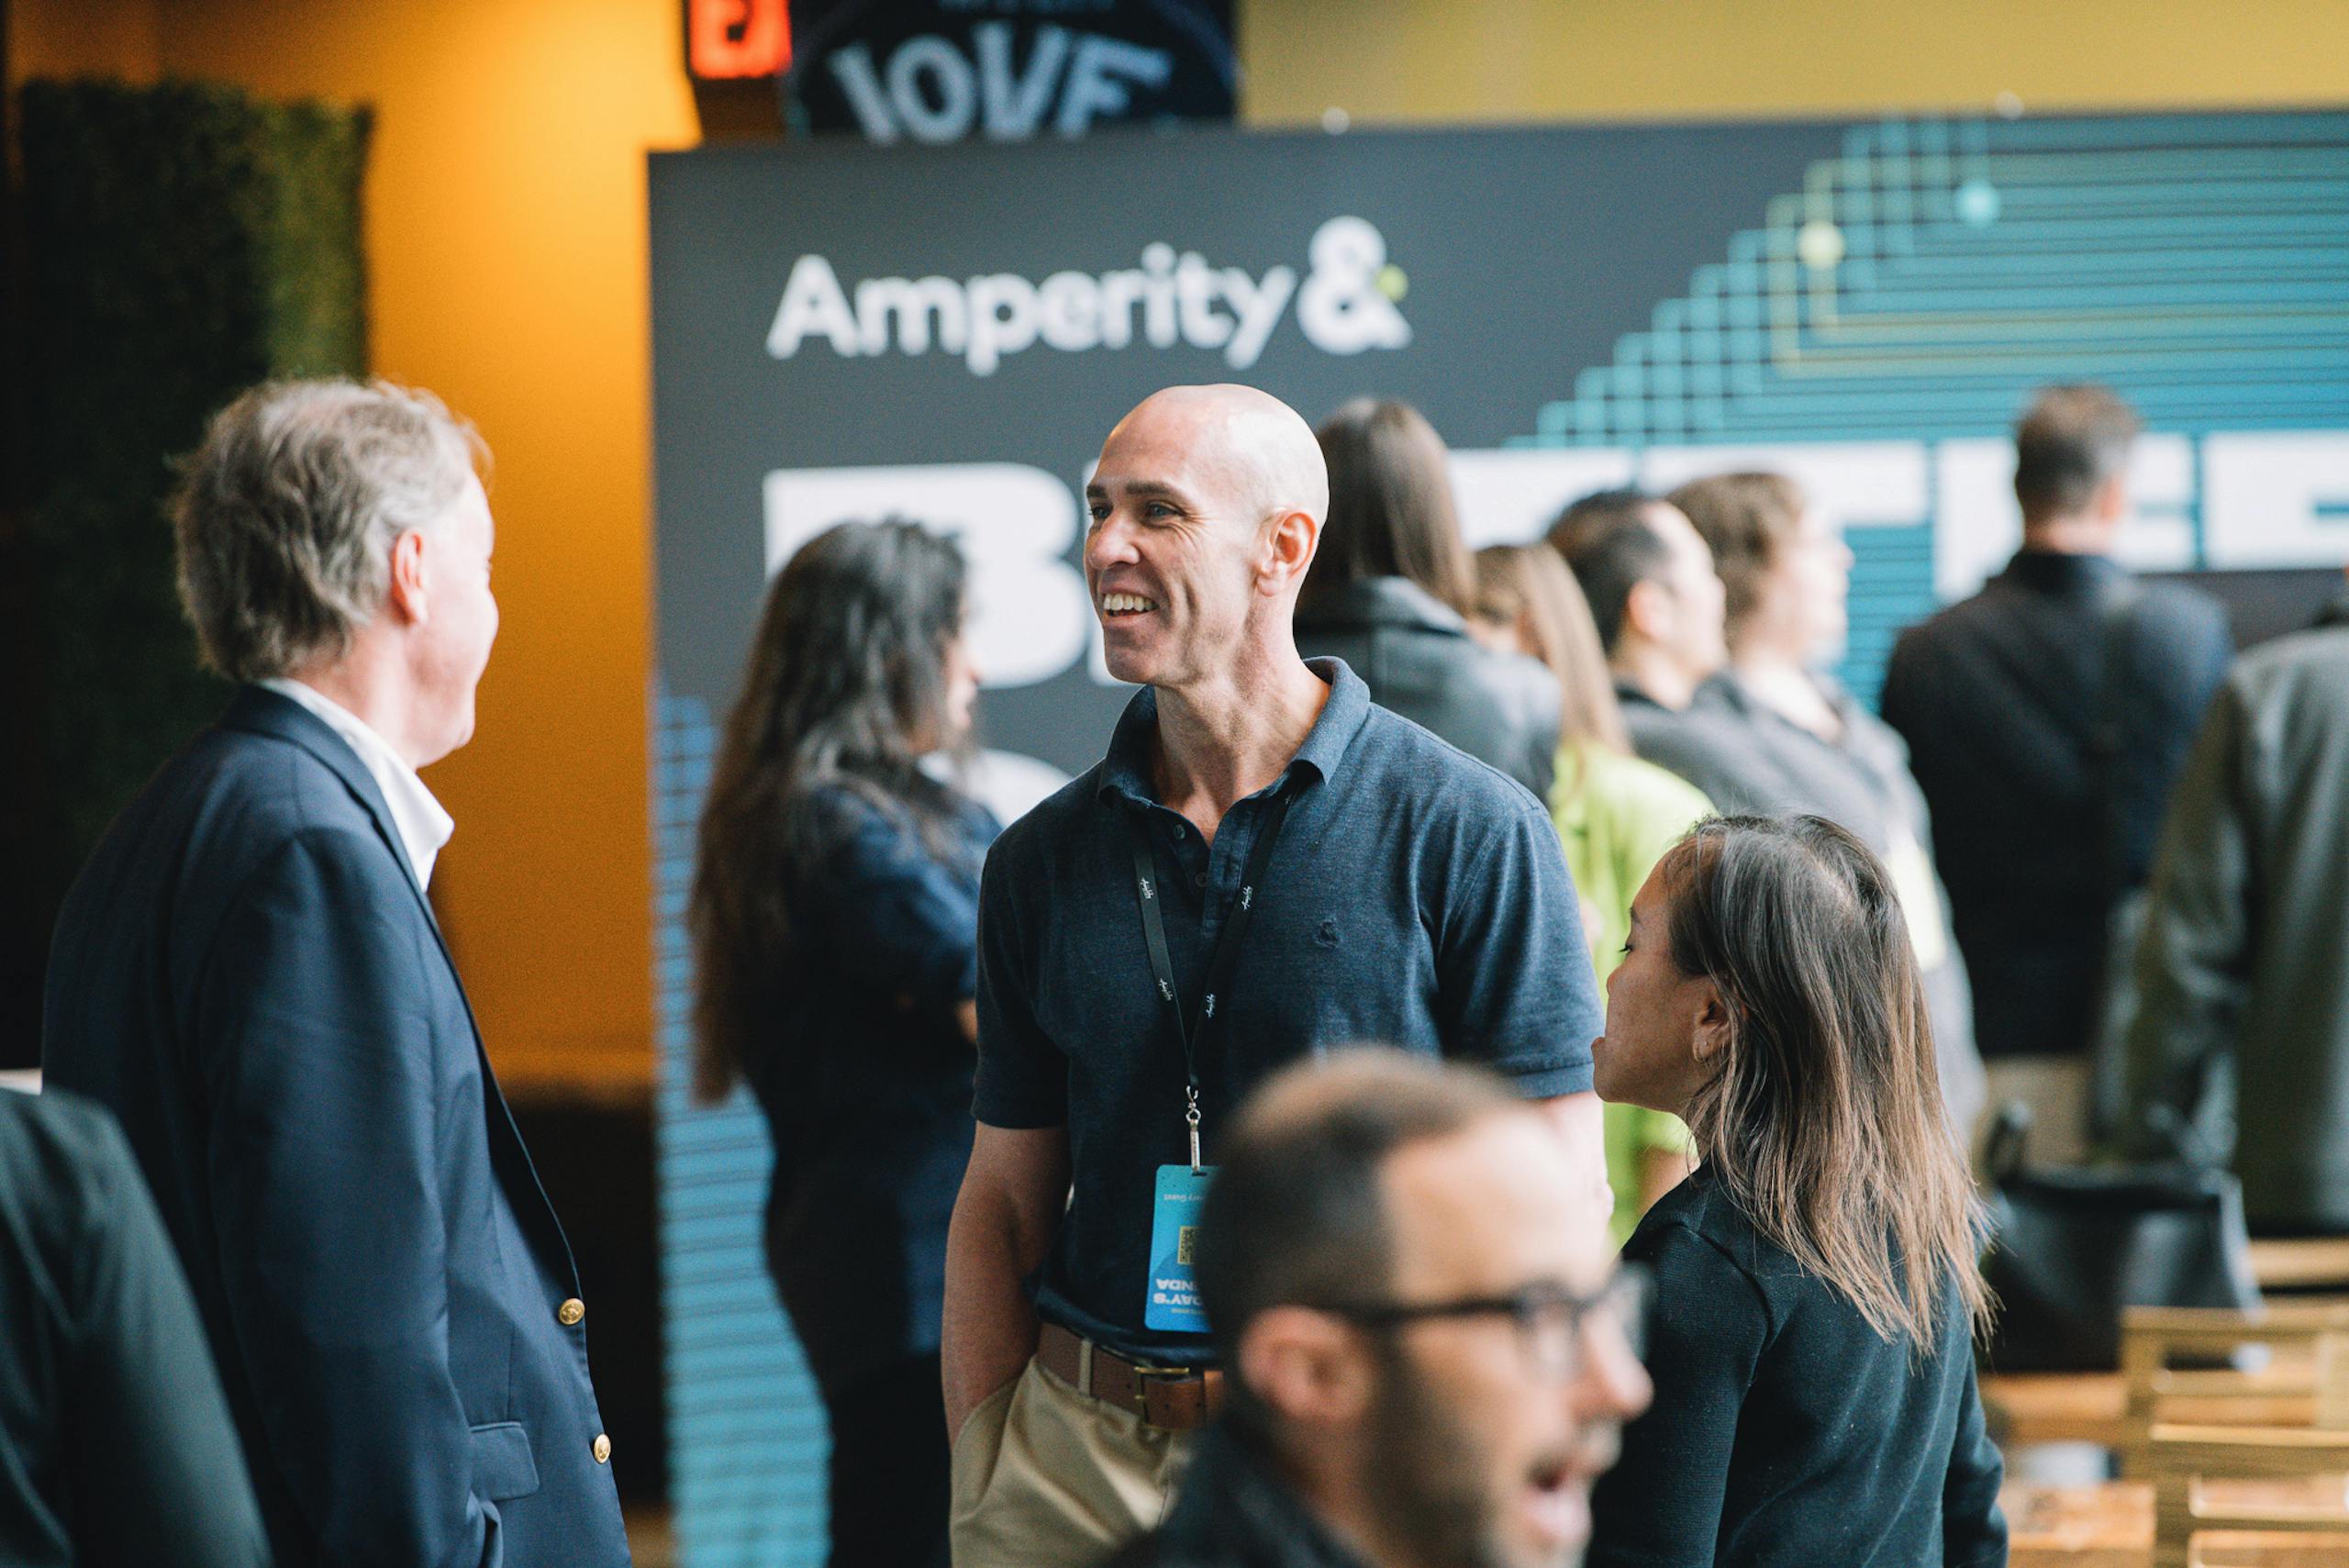 Two people chatting amiably at Amplify, Amperity's annual summit